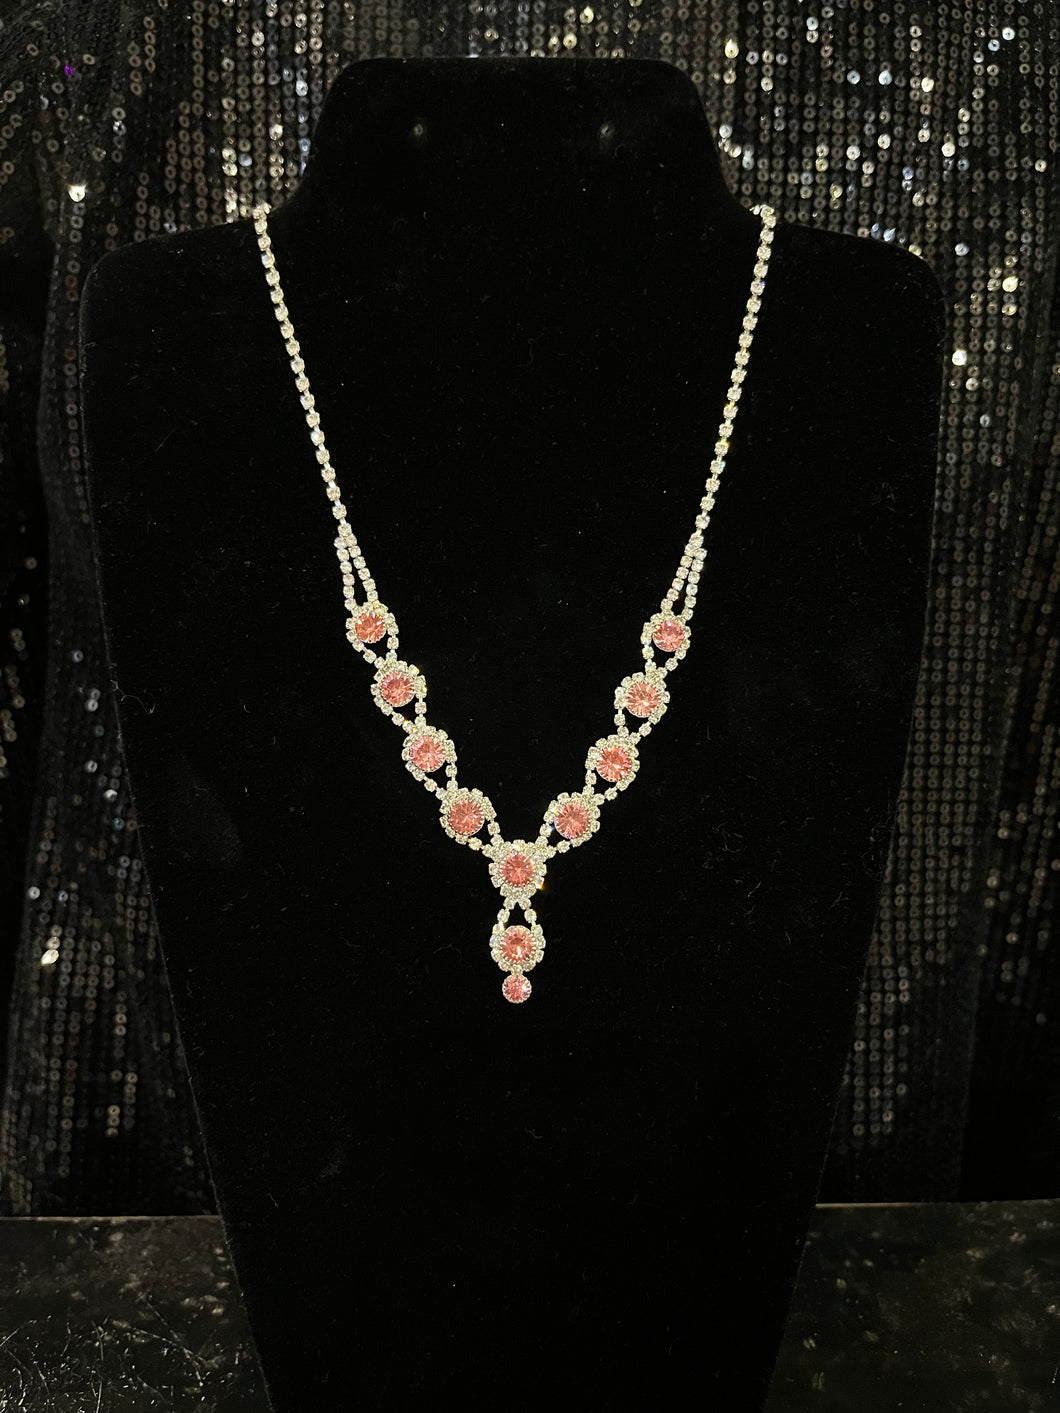 Silver/Pink Necklace